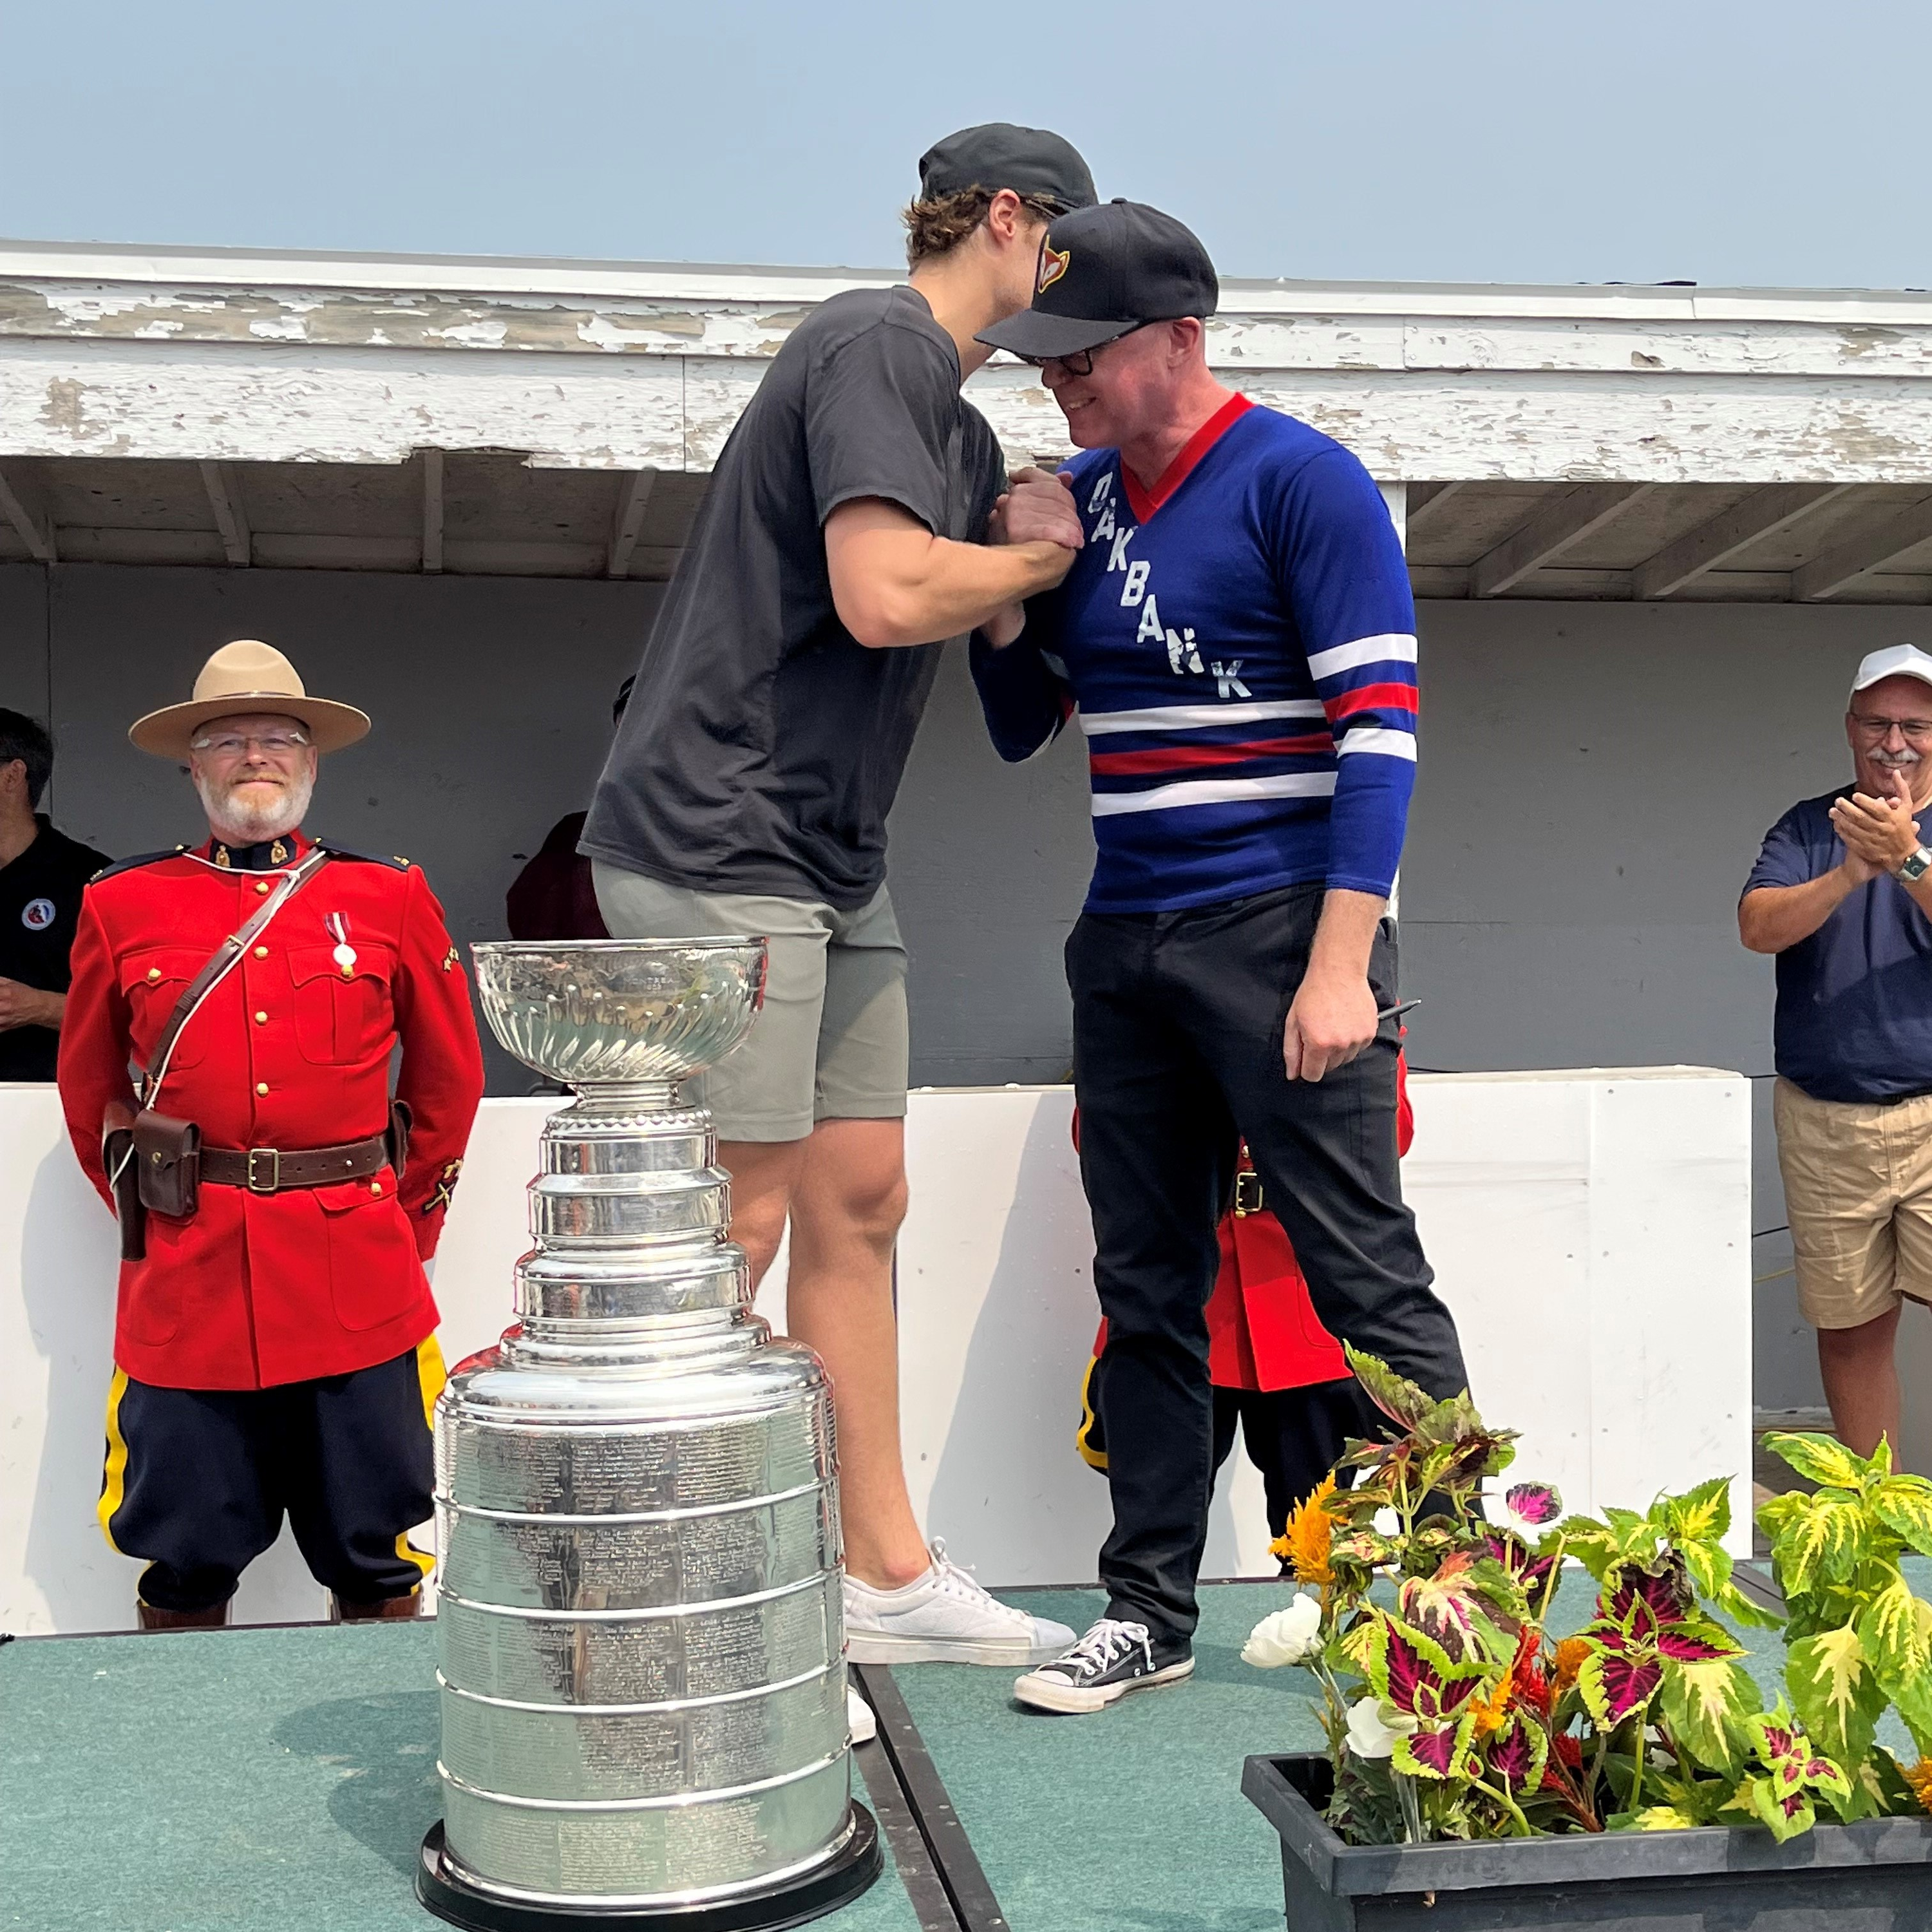 The Stanley Cup Parade in Oakbank was truly a day to remember!